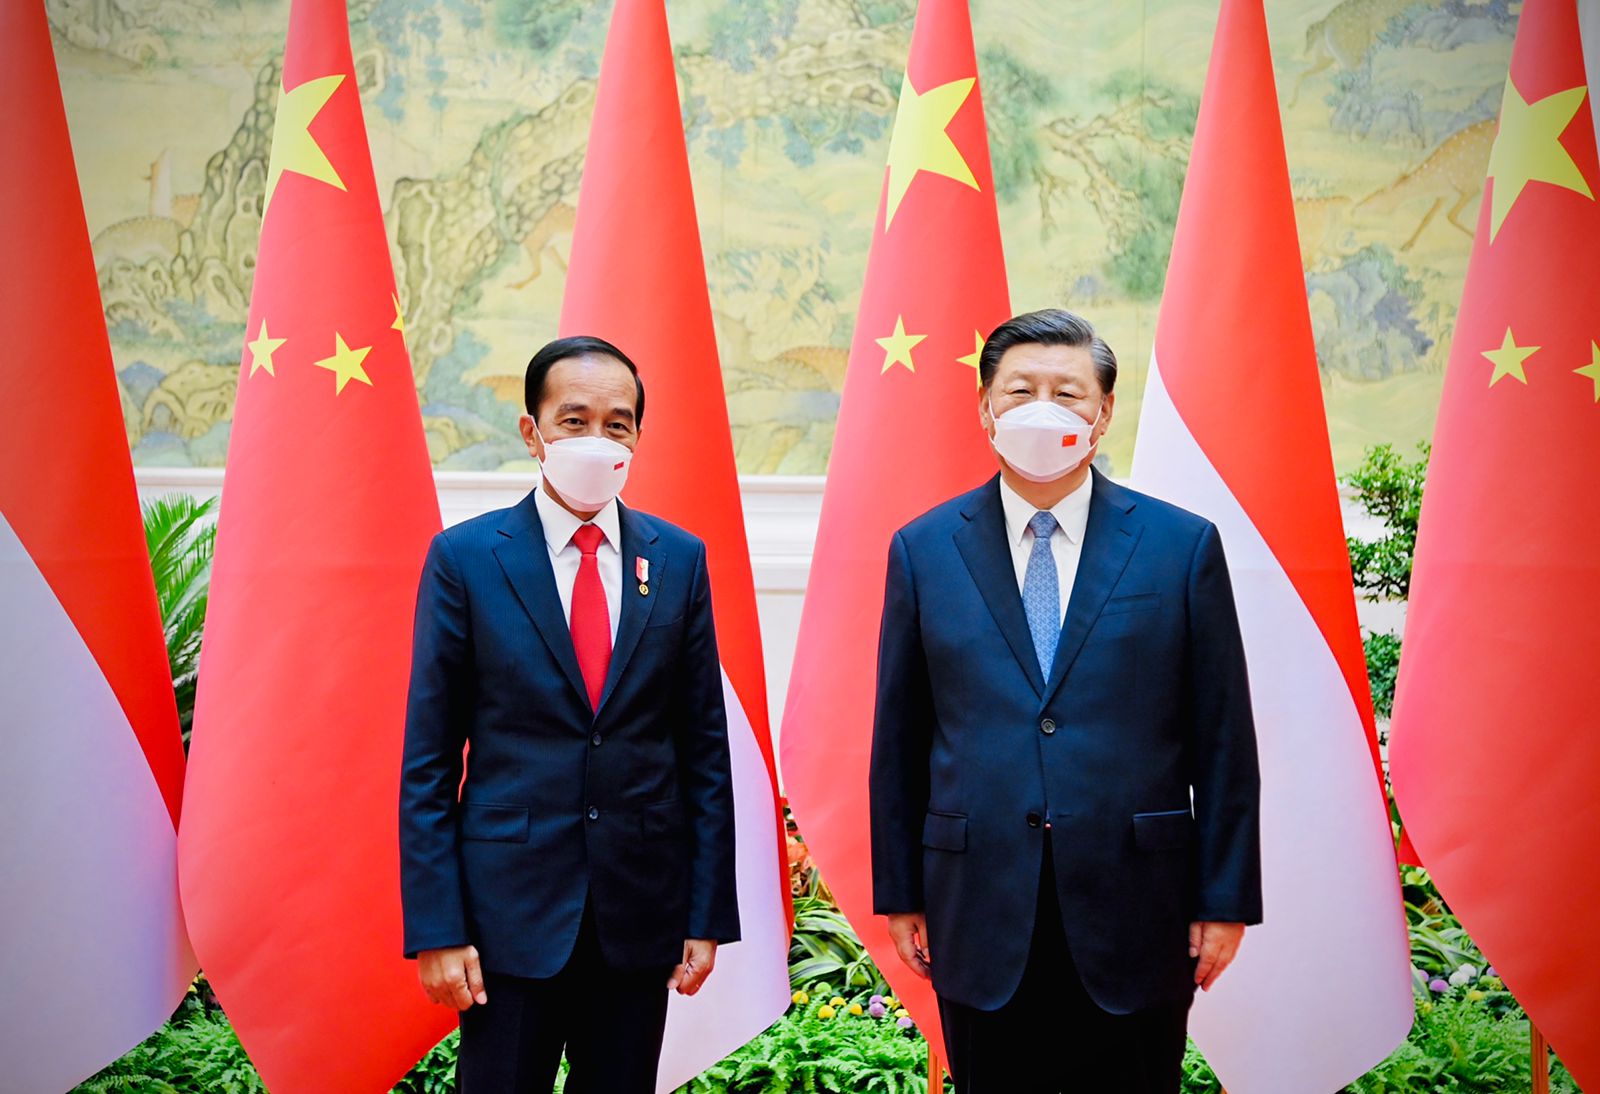 Indonesian President’s visit to China strengthens two countries’ intimacy: President Xi